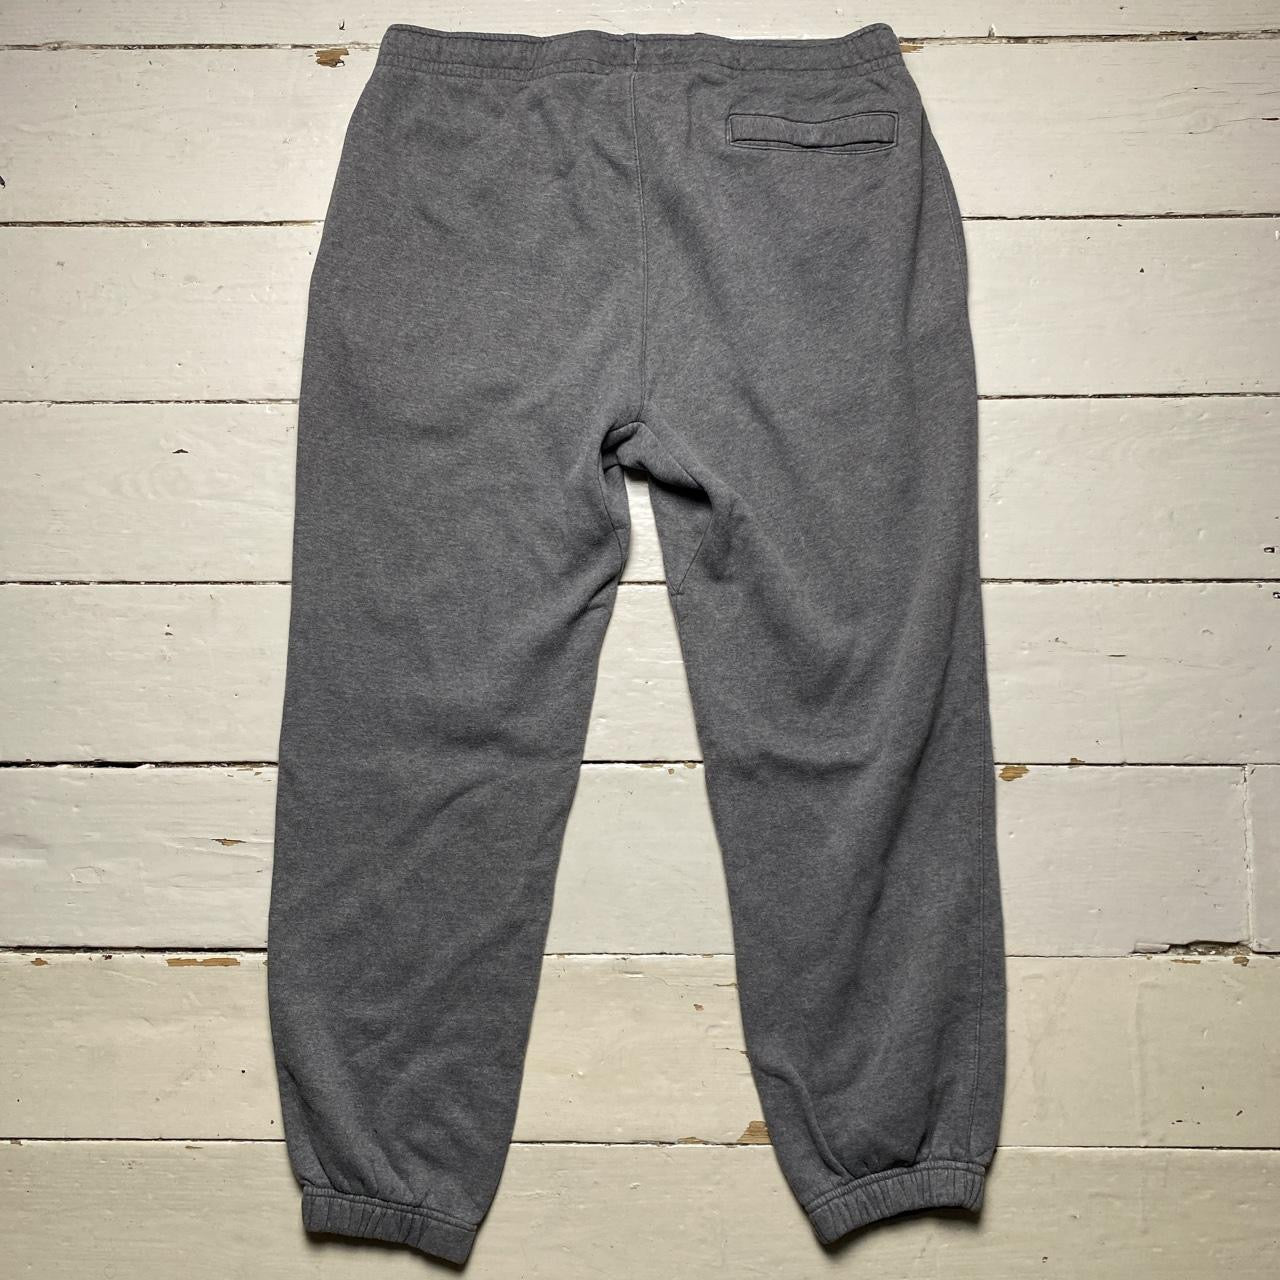 Nike Swoosh Joggers Grey and White (XL)